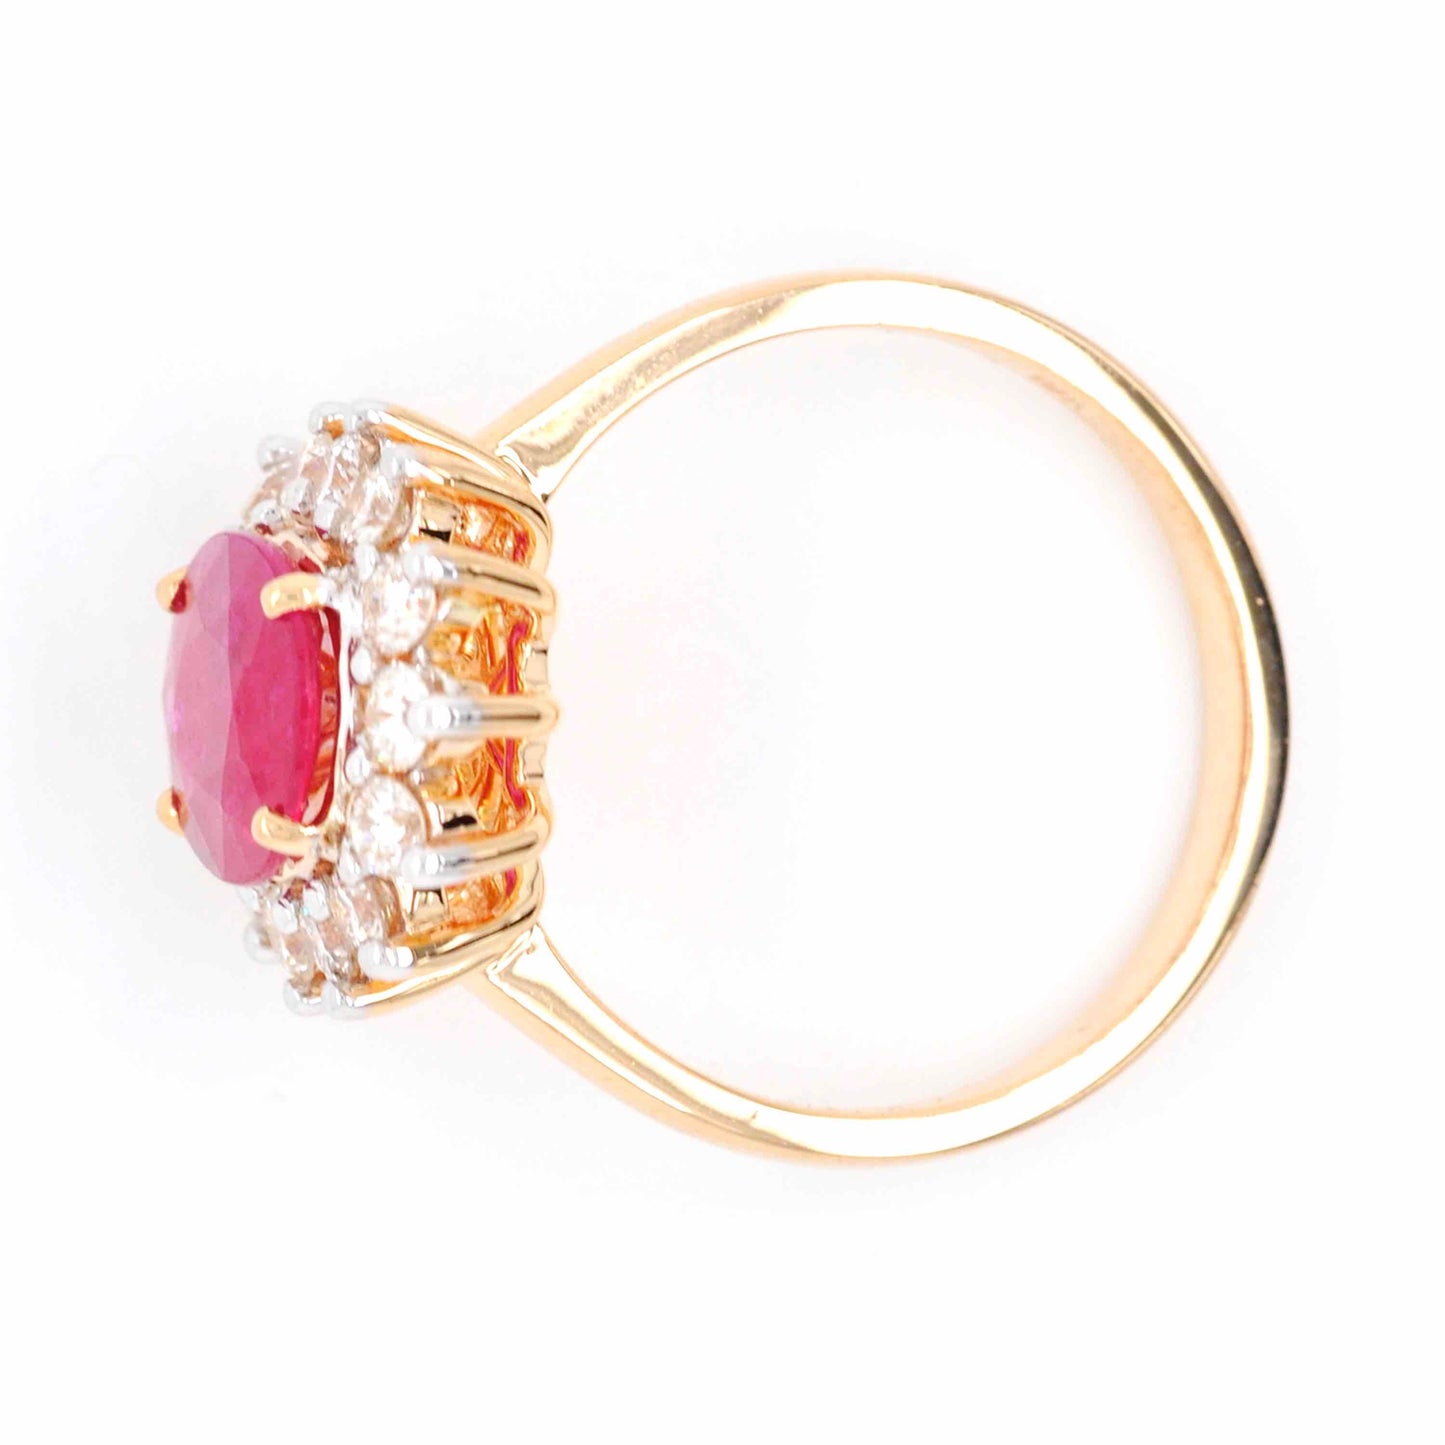 Ruby Diamond Cluster Ring with an alluring oval shape and lustrous gemstones